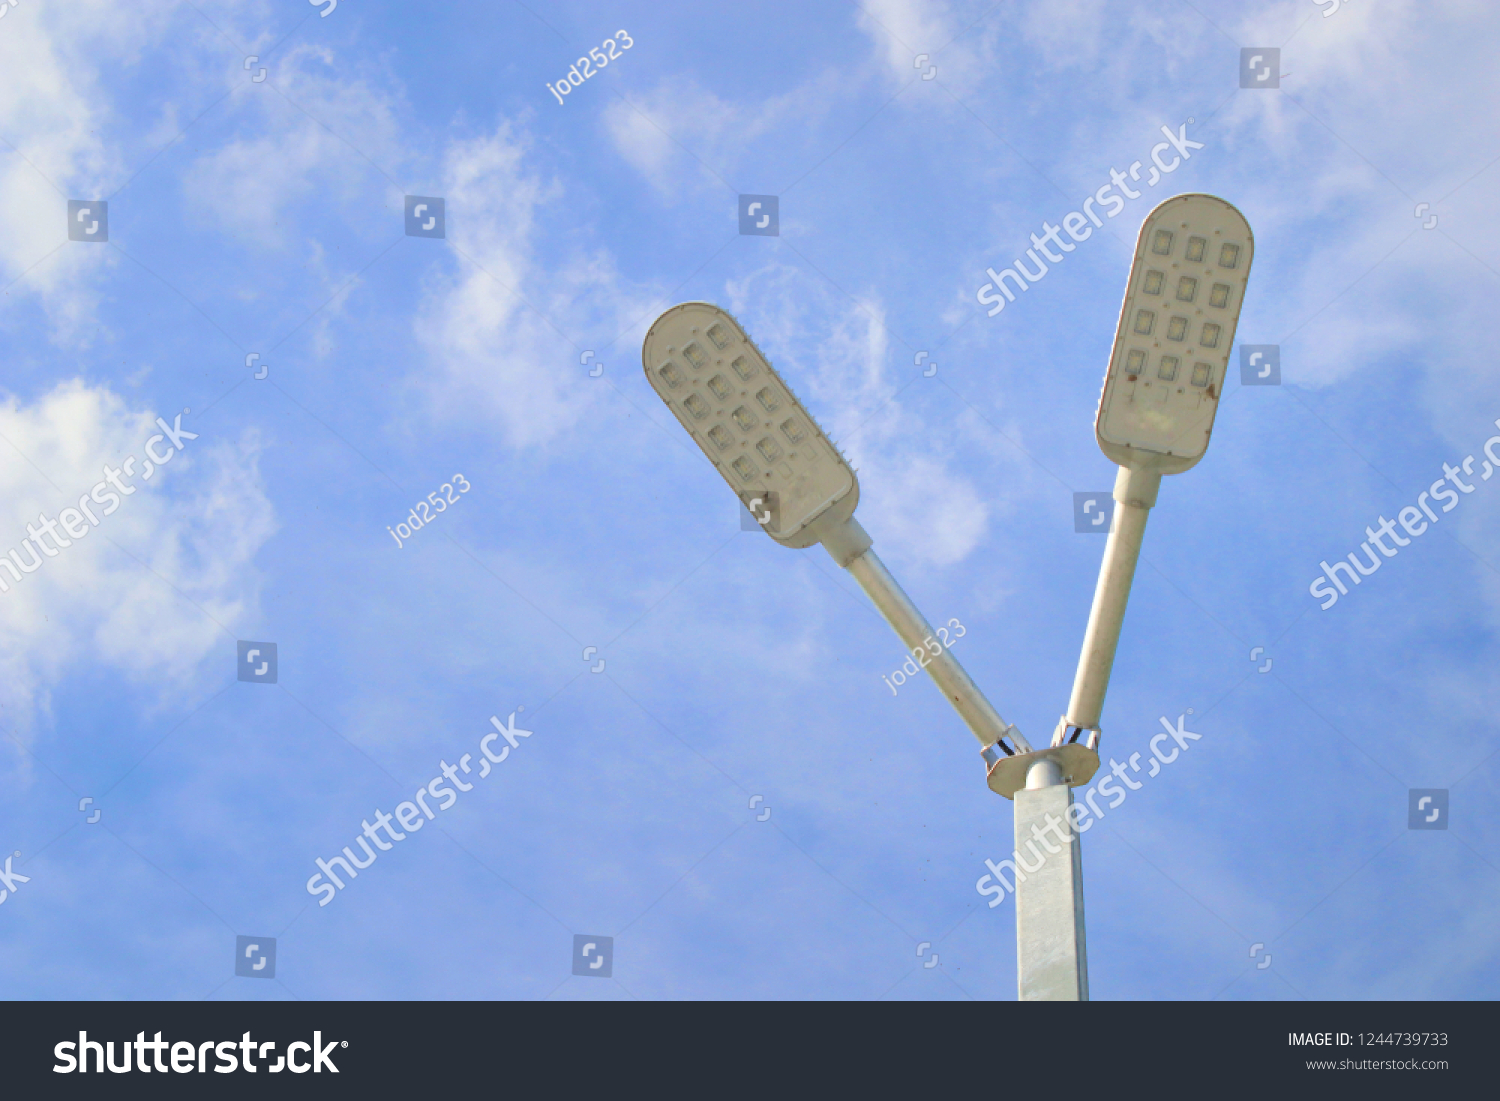 led light pole of car park concept saving energy are saved we save earth #1244739733